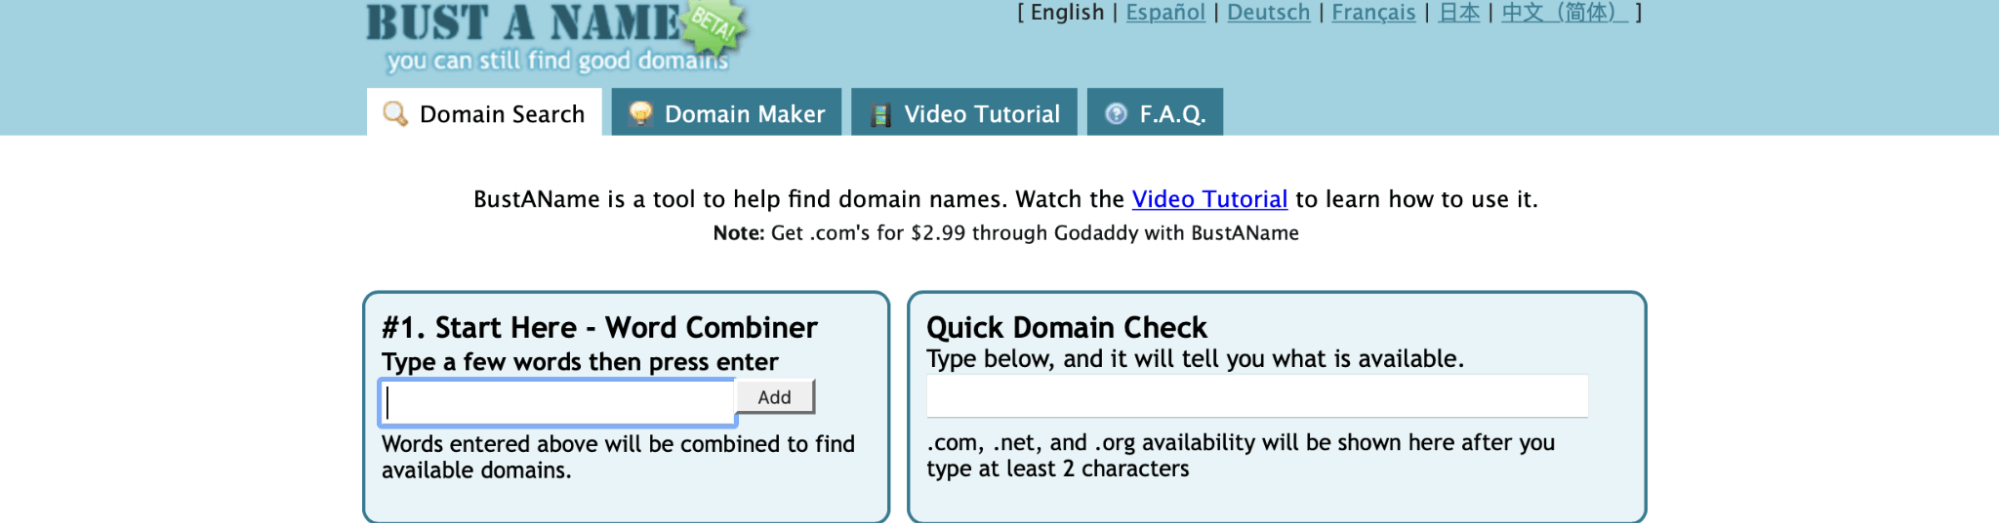 Bust a Name domain search tool